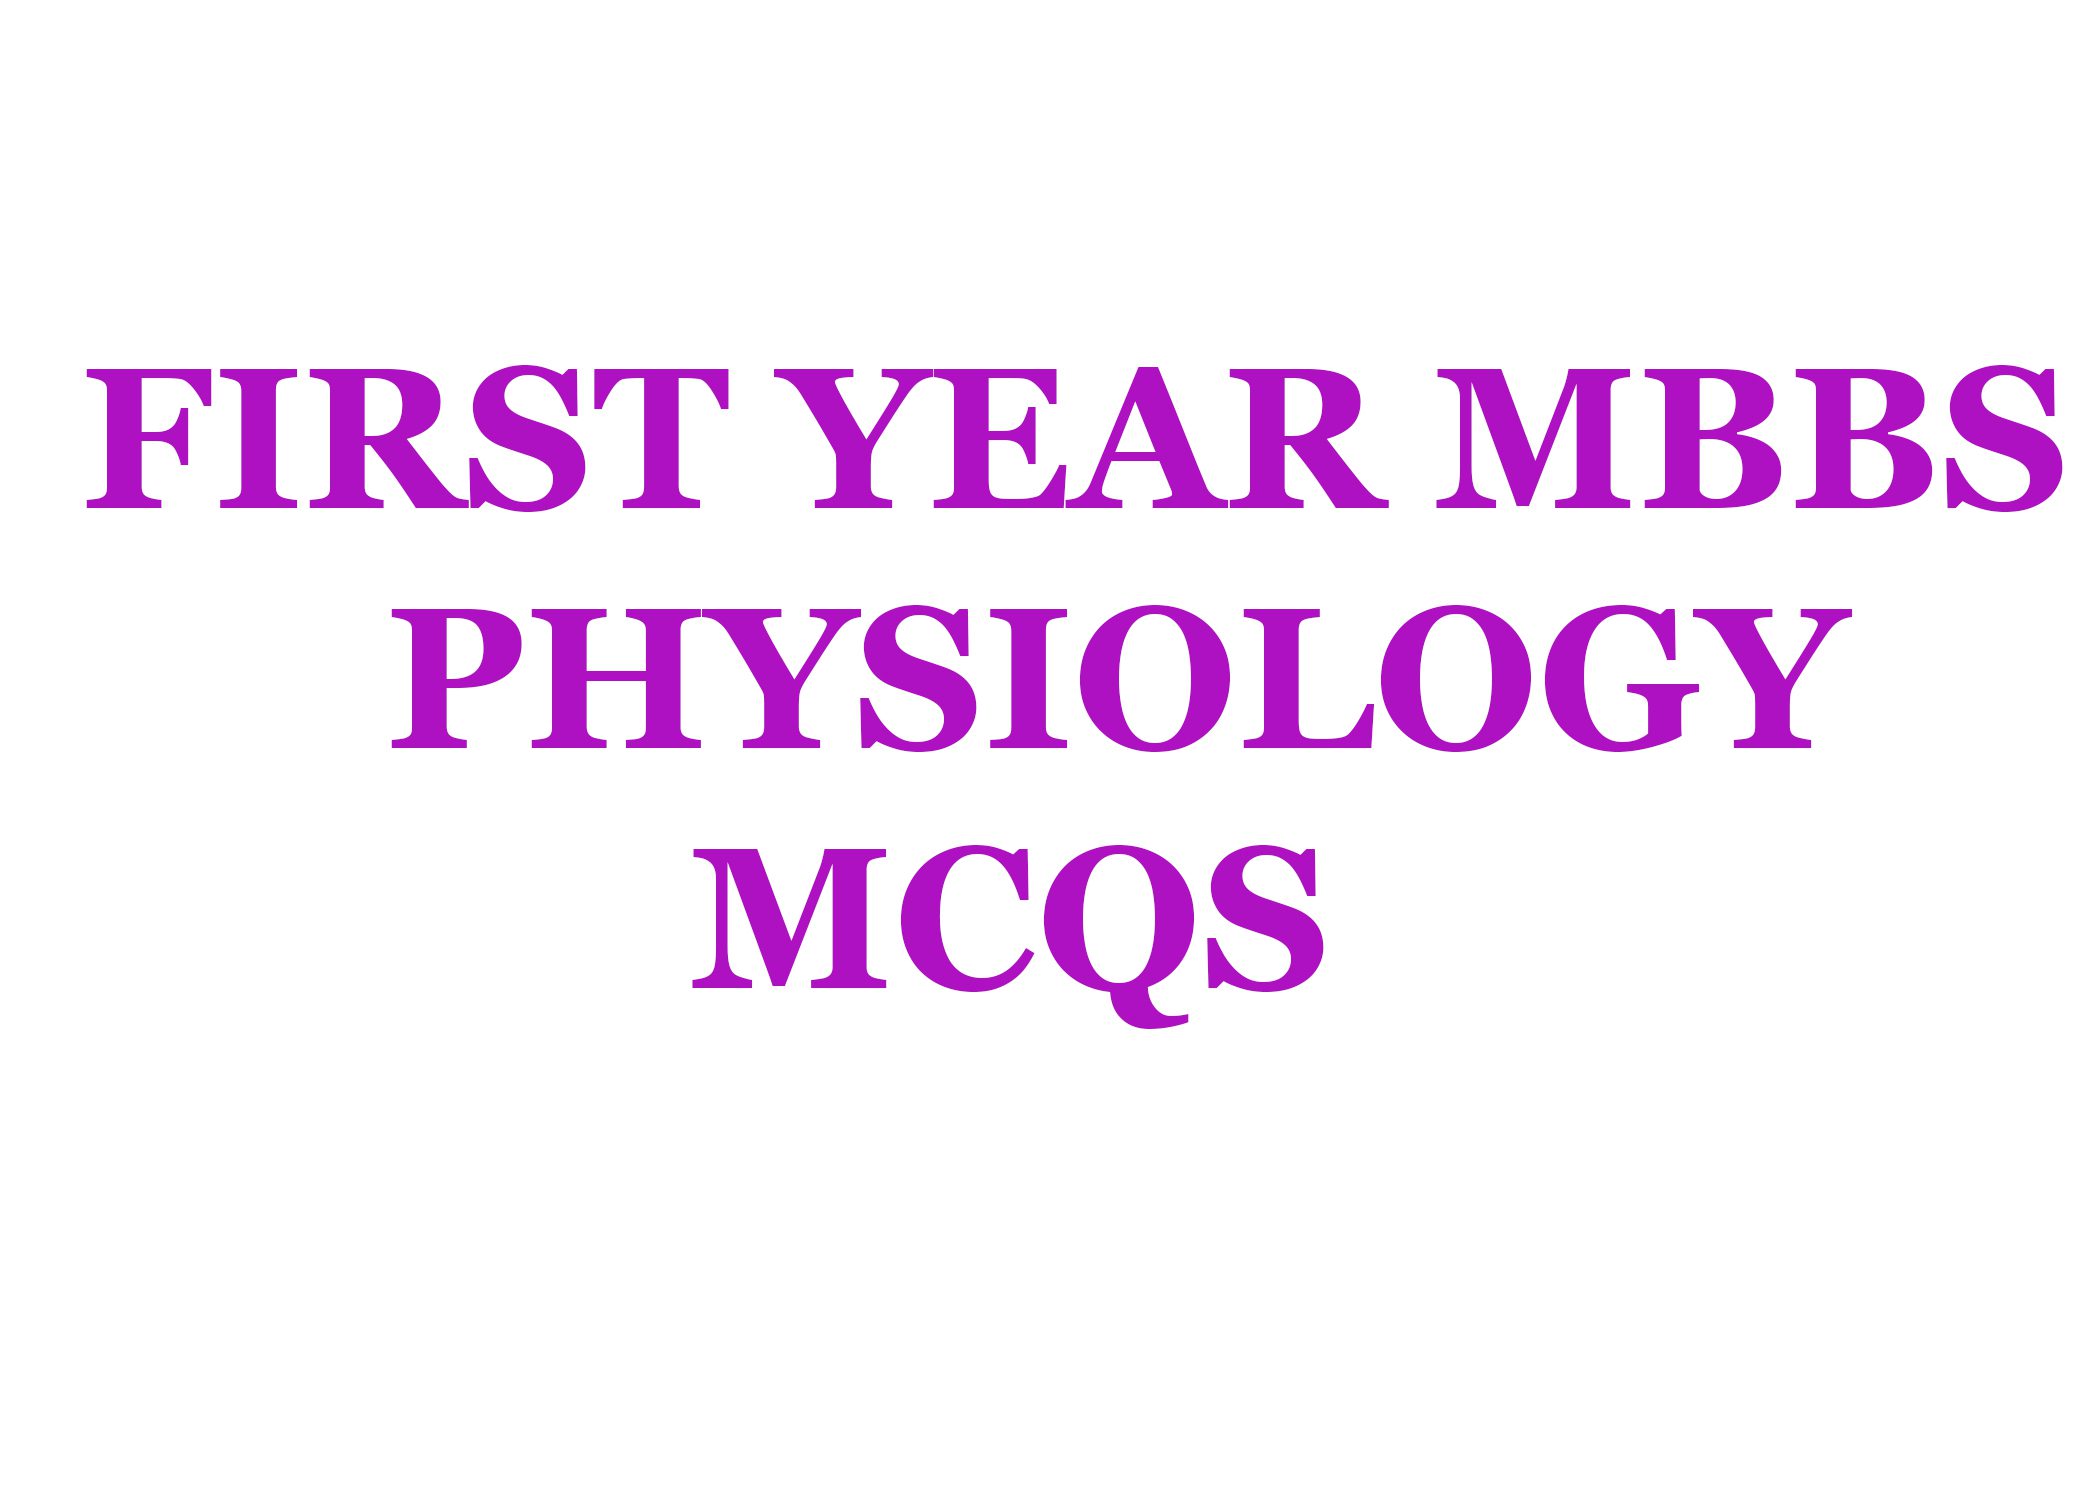 Physiology mcqs for first year mbbs